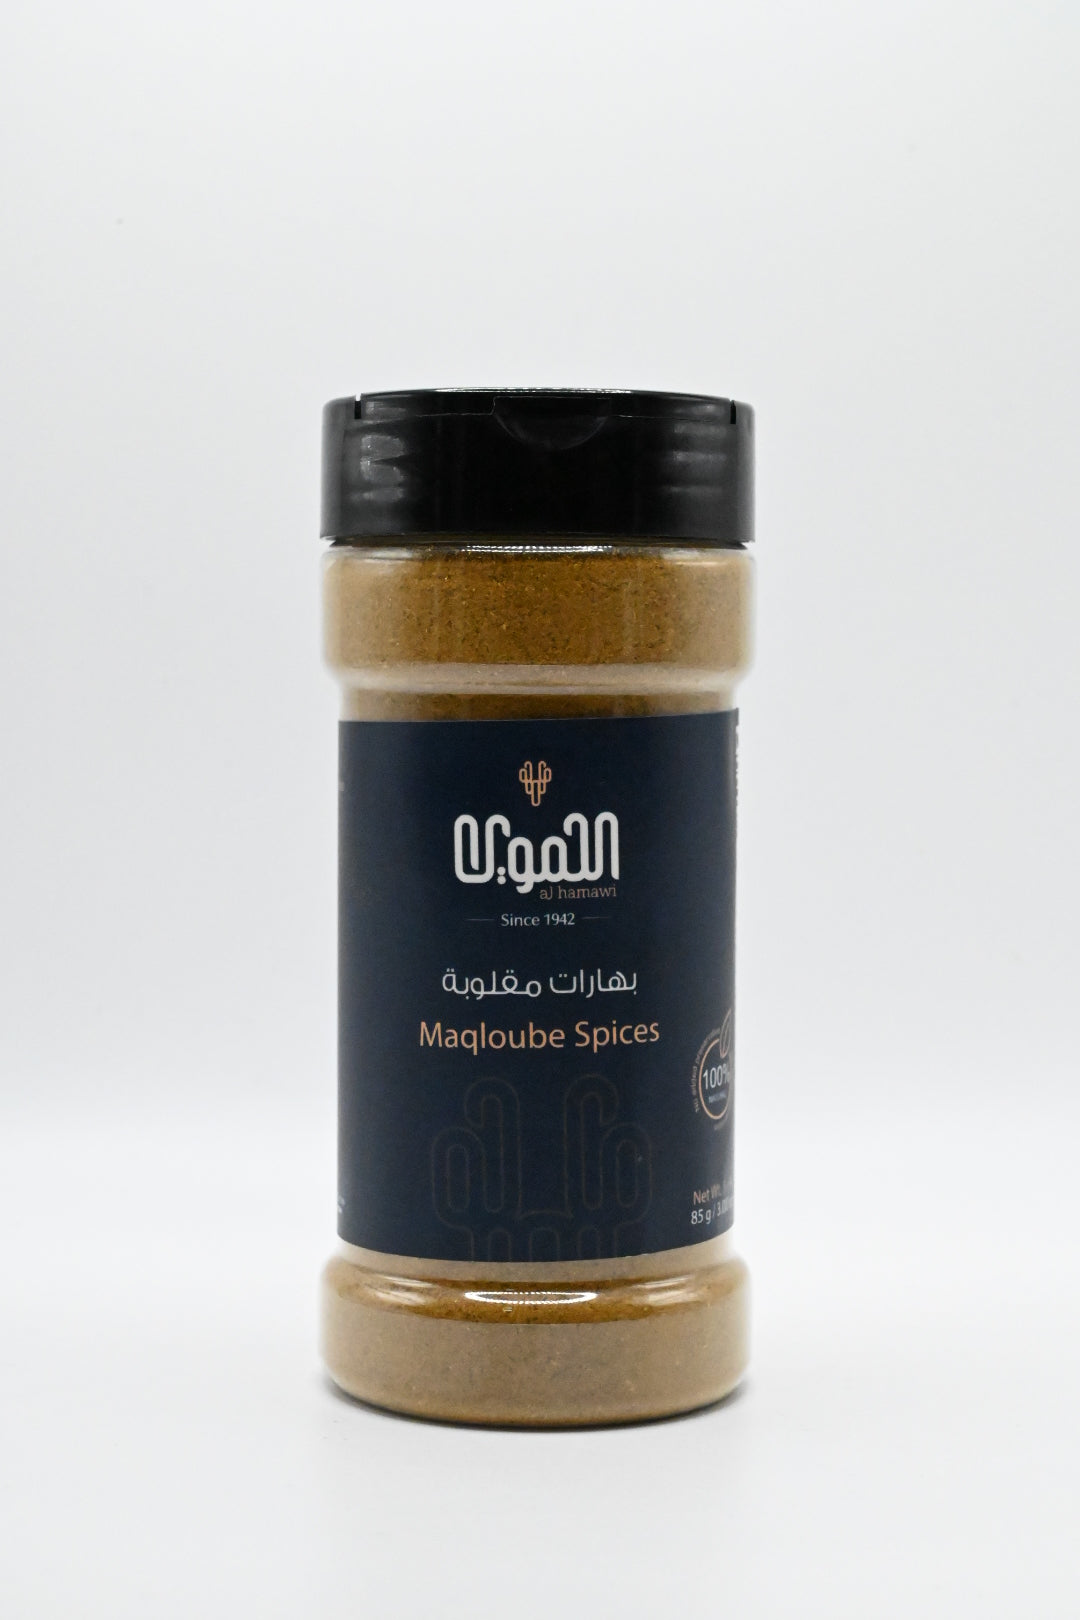 Maqloube Spices